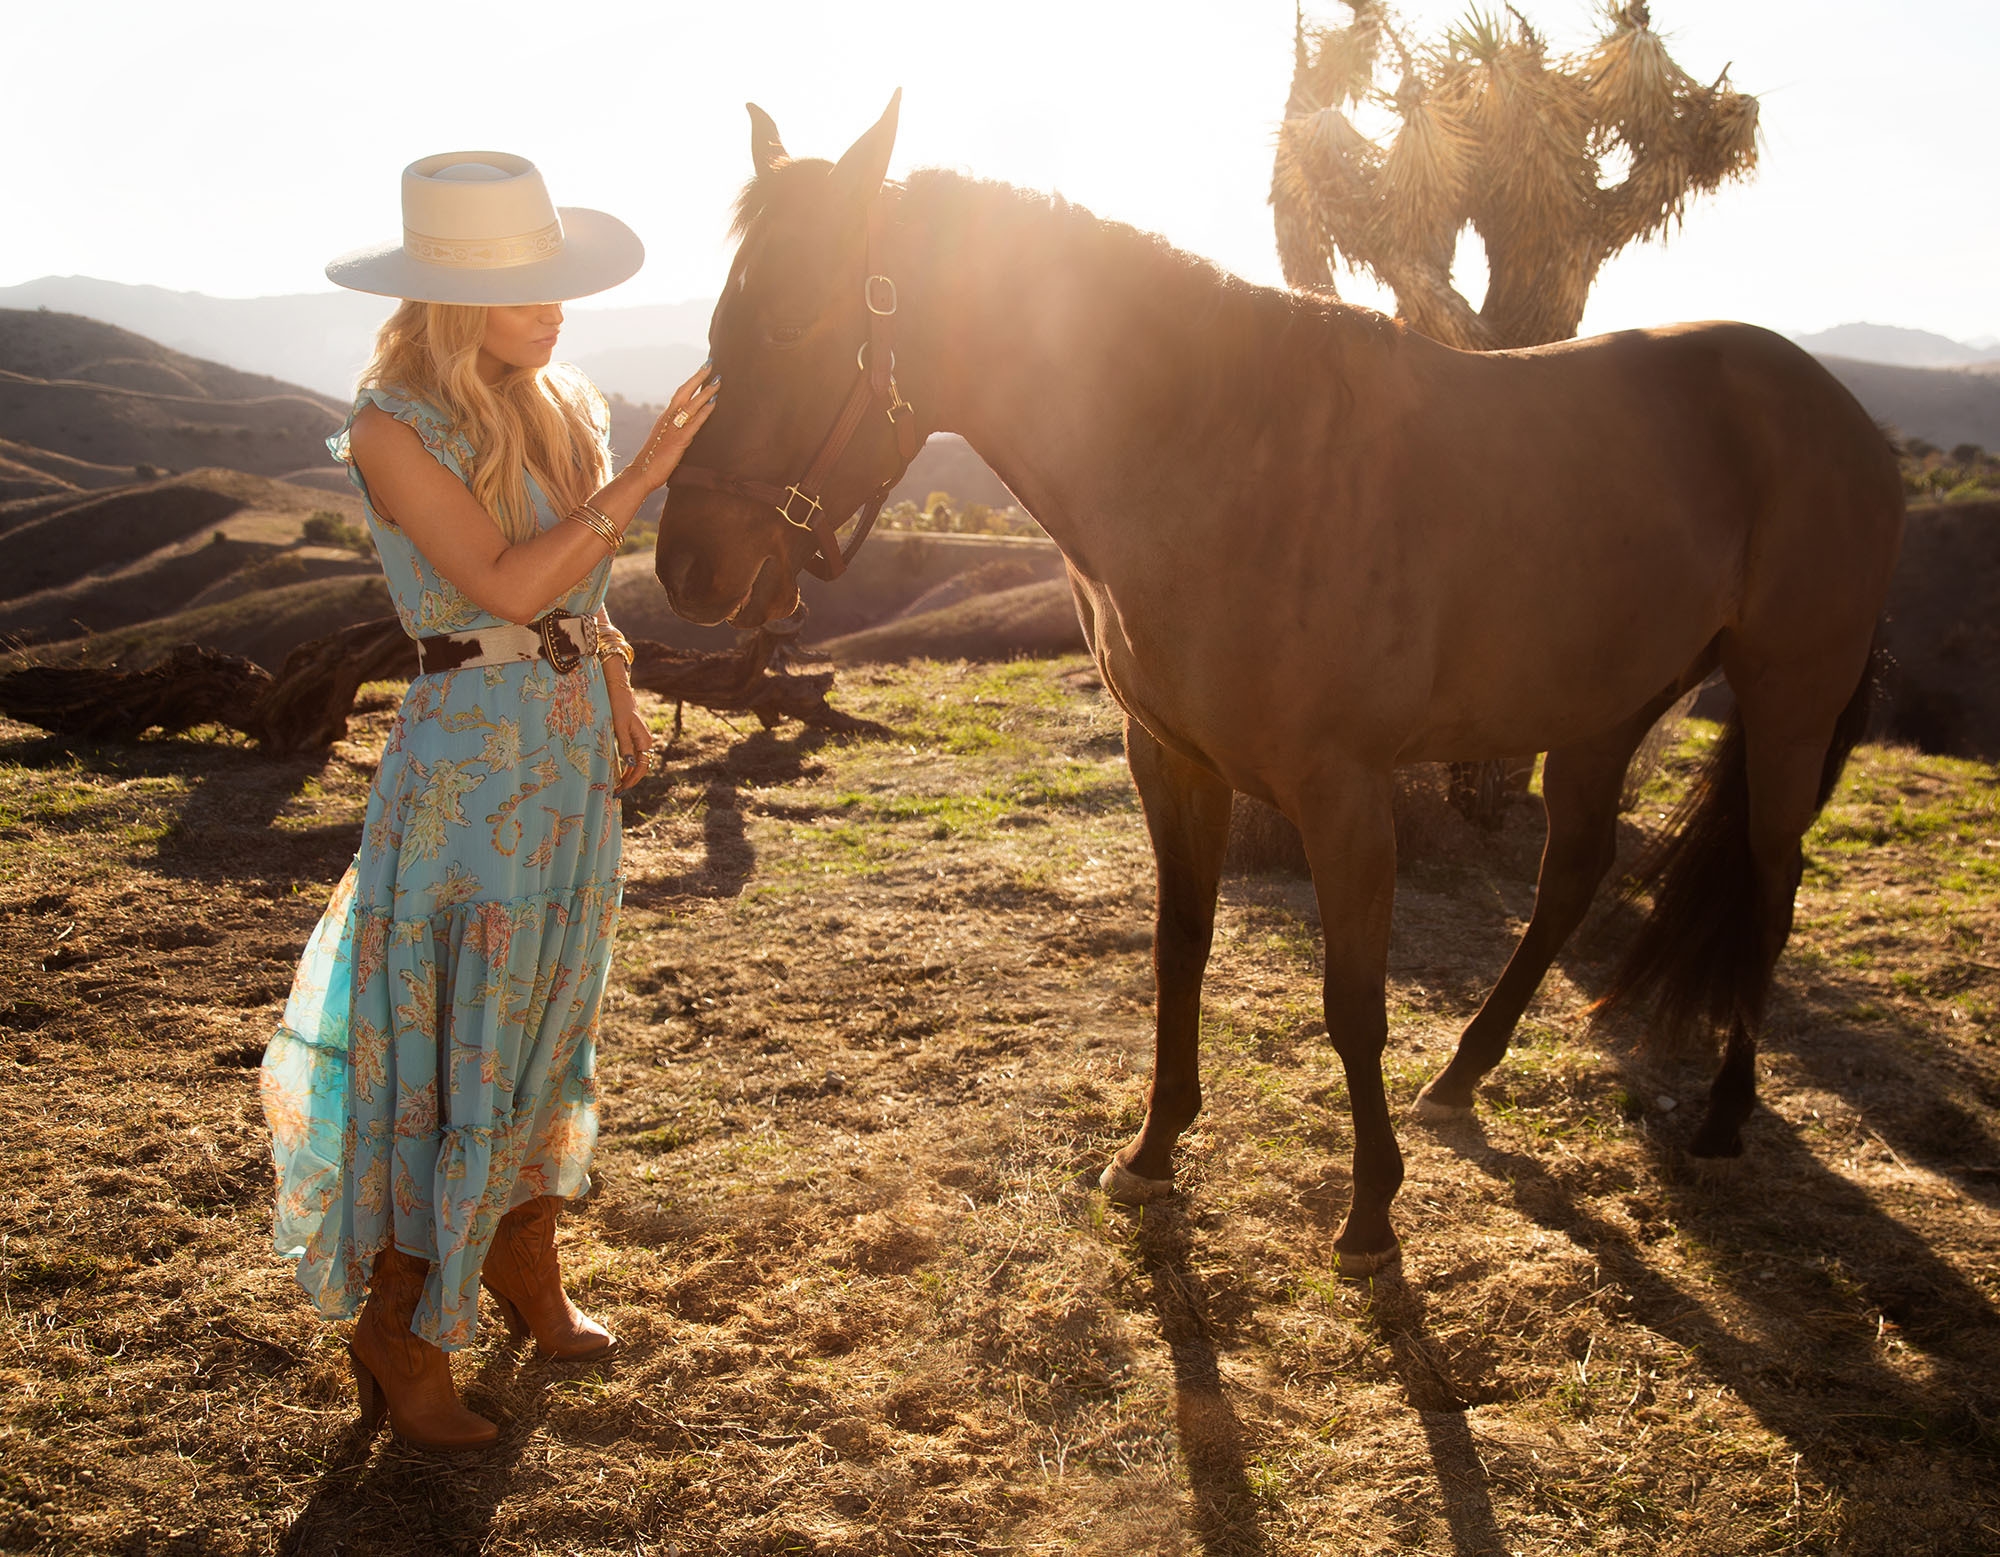 Jessica Simpson (singer, actress, author) stands in a field wearing cowgirl boots, a flowy dress, and belt, as she pets a horse on the muzzle in a promotional image